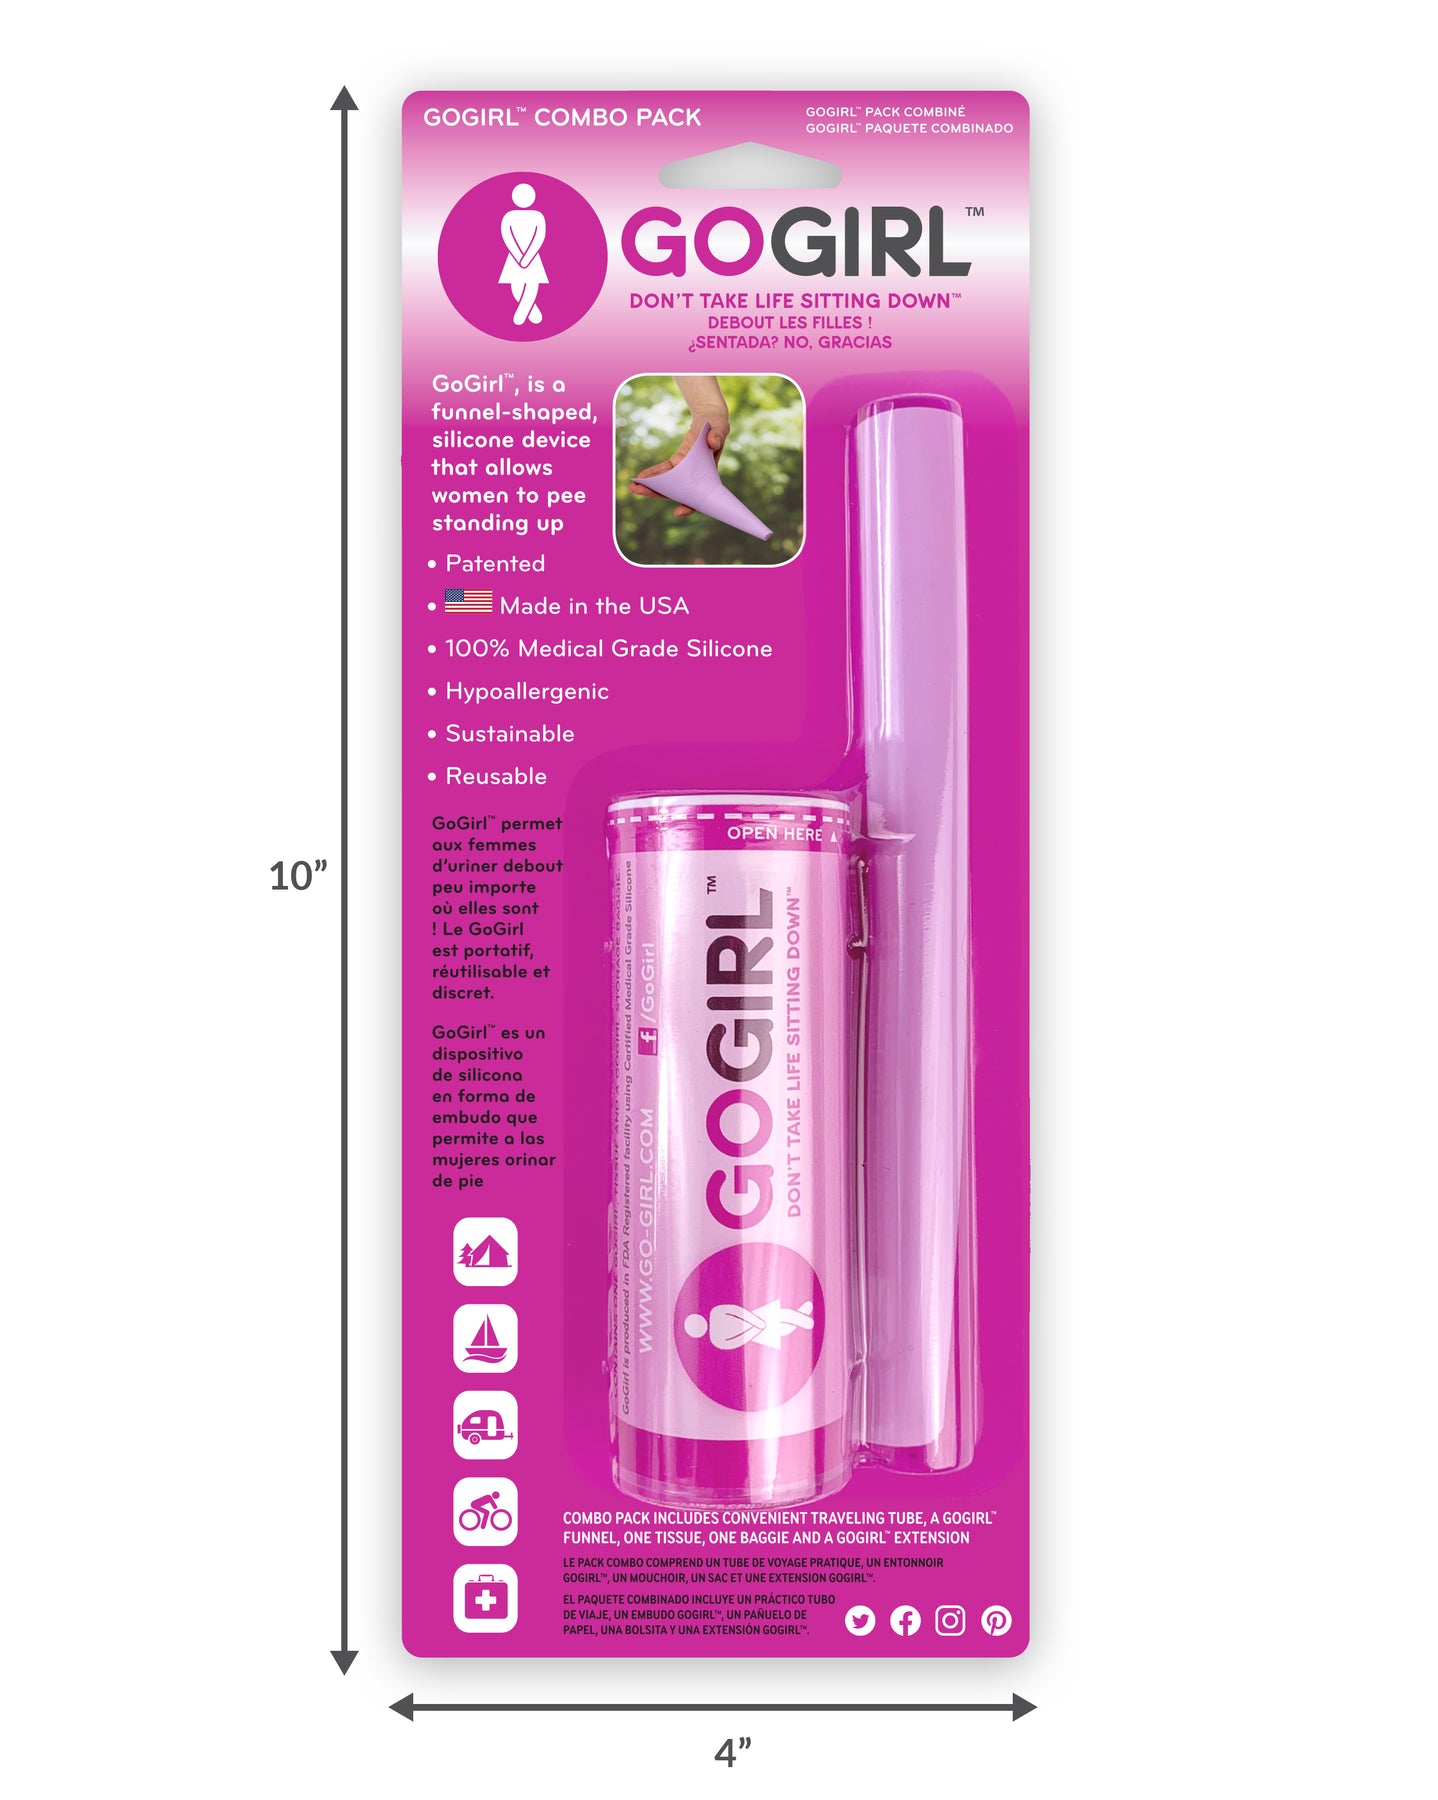 How to Use GoGirl 